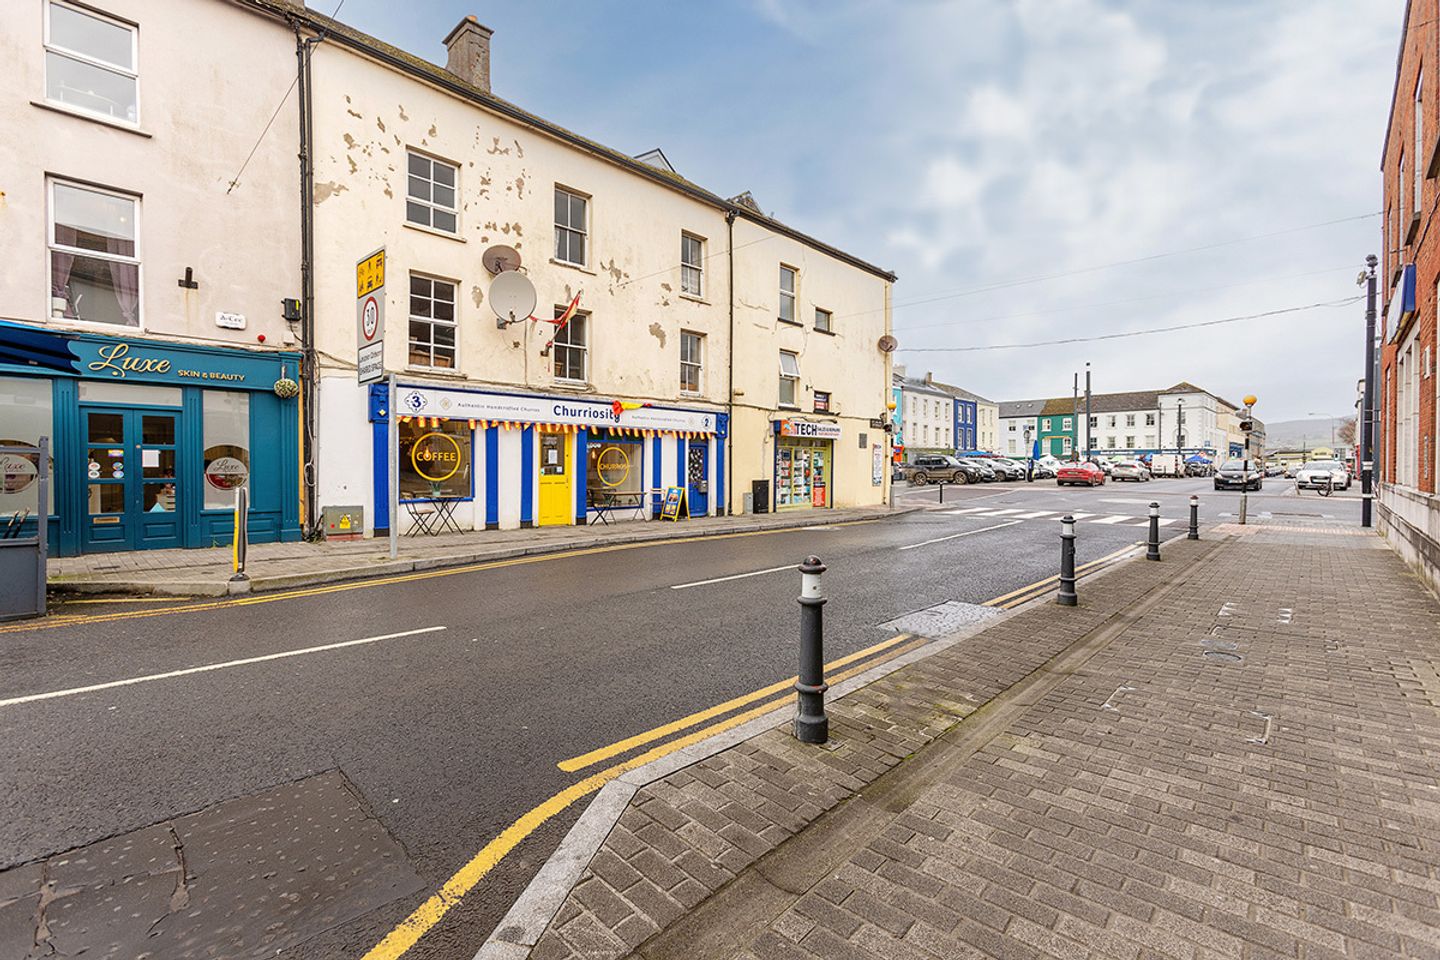 2/3 Saint Mary Street, Dungarvan, Co. Waterford, X35YP92